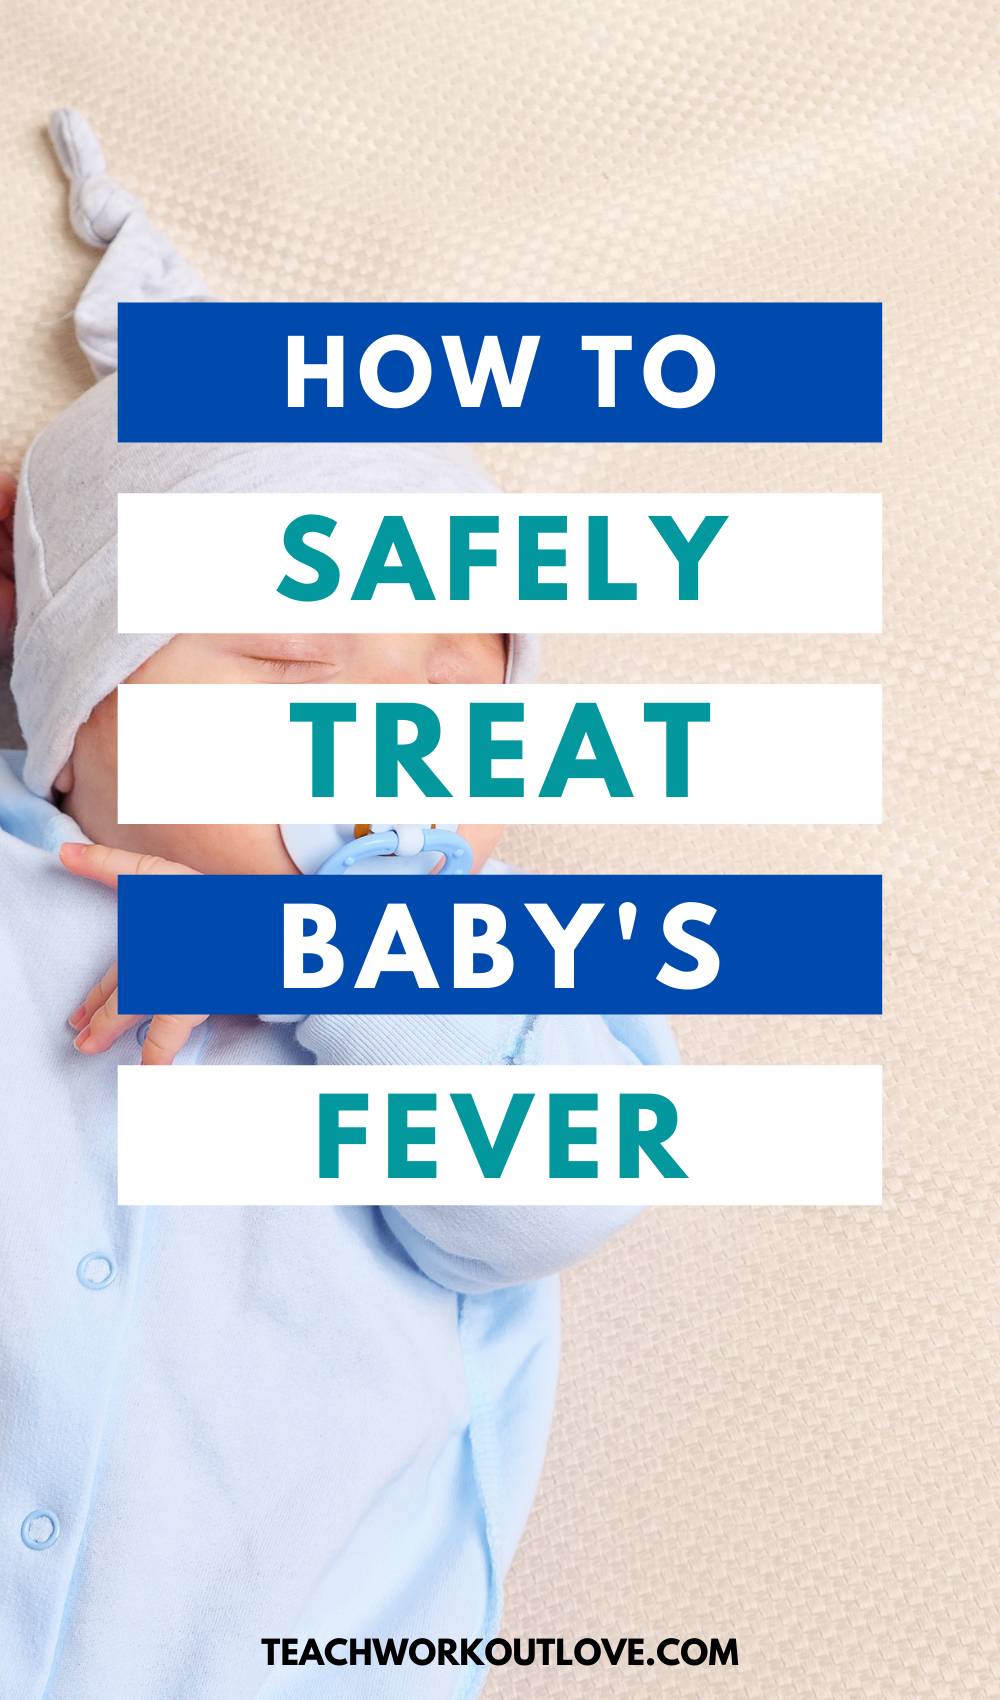 Do you know what to do when your baby has a fever? Here is how to safely treat and lower your baby's fever using this indepth guide.